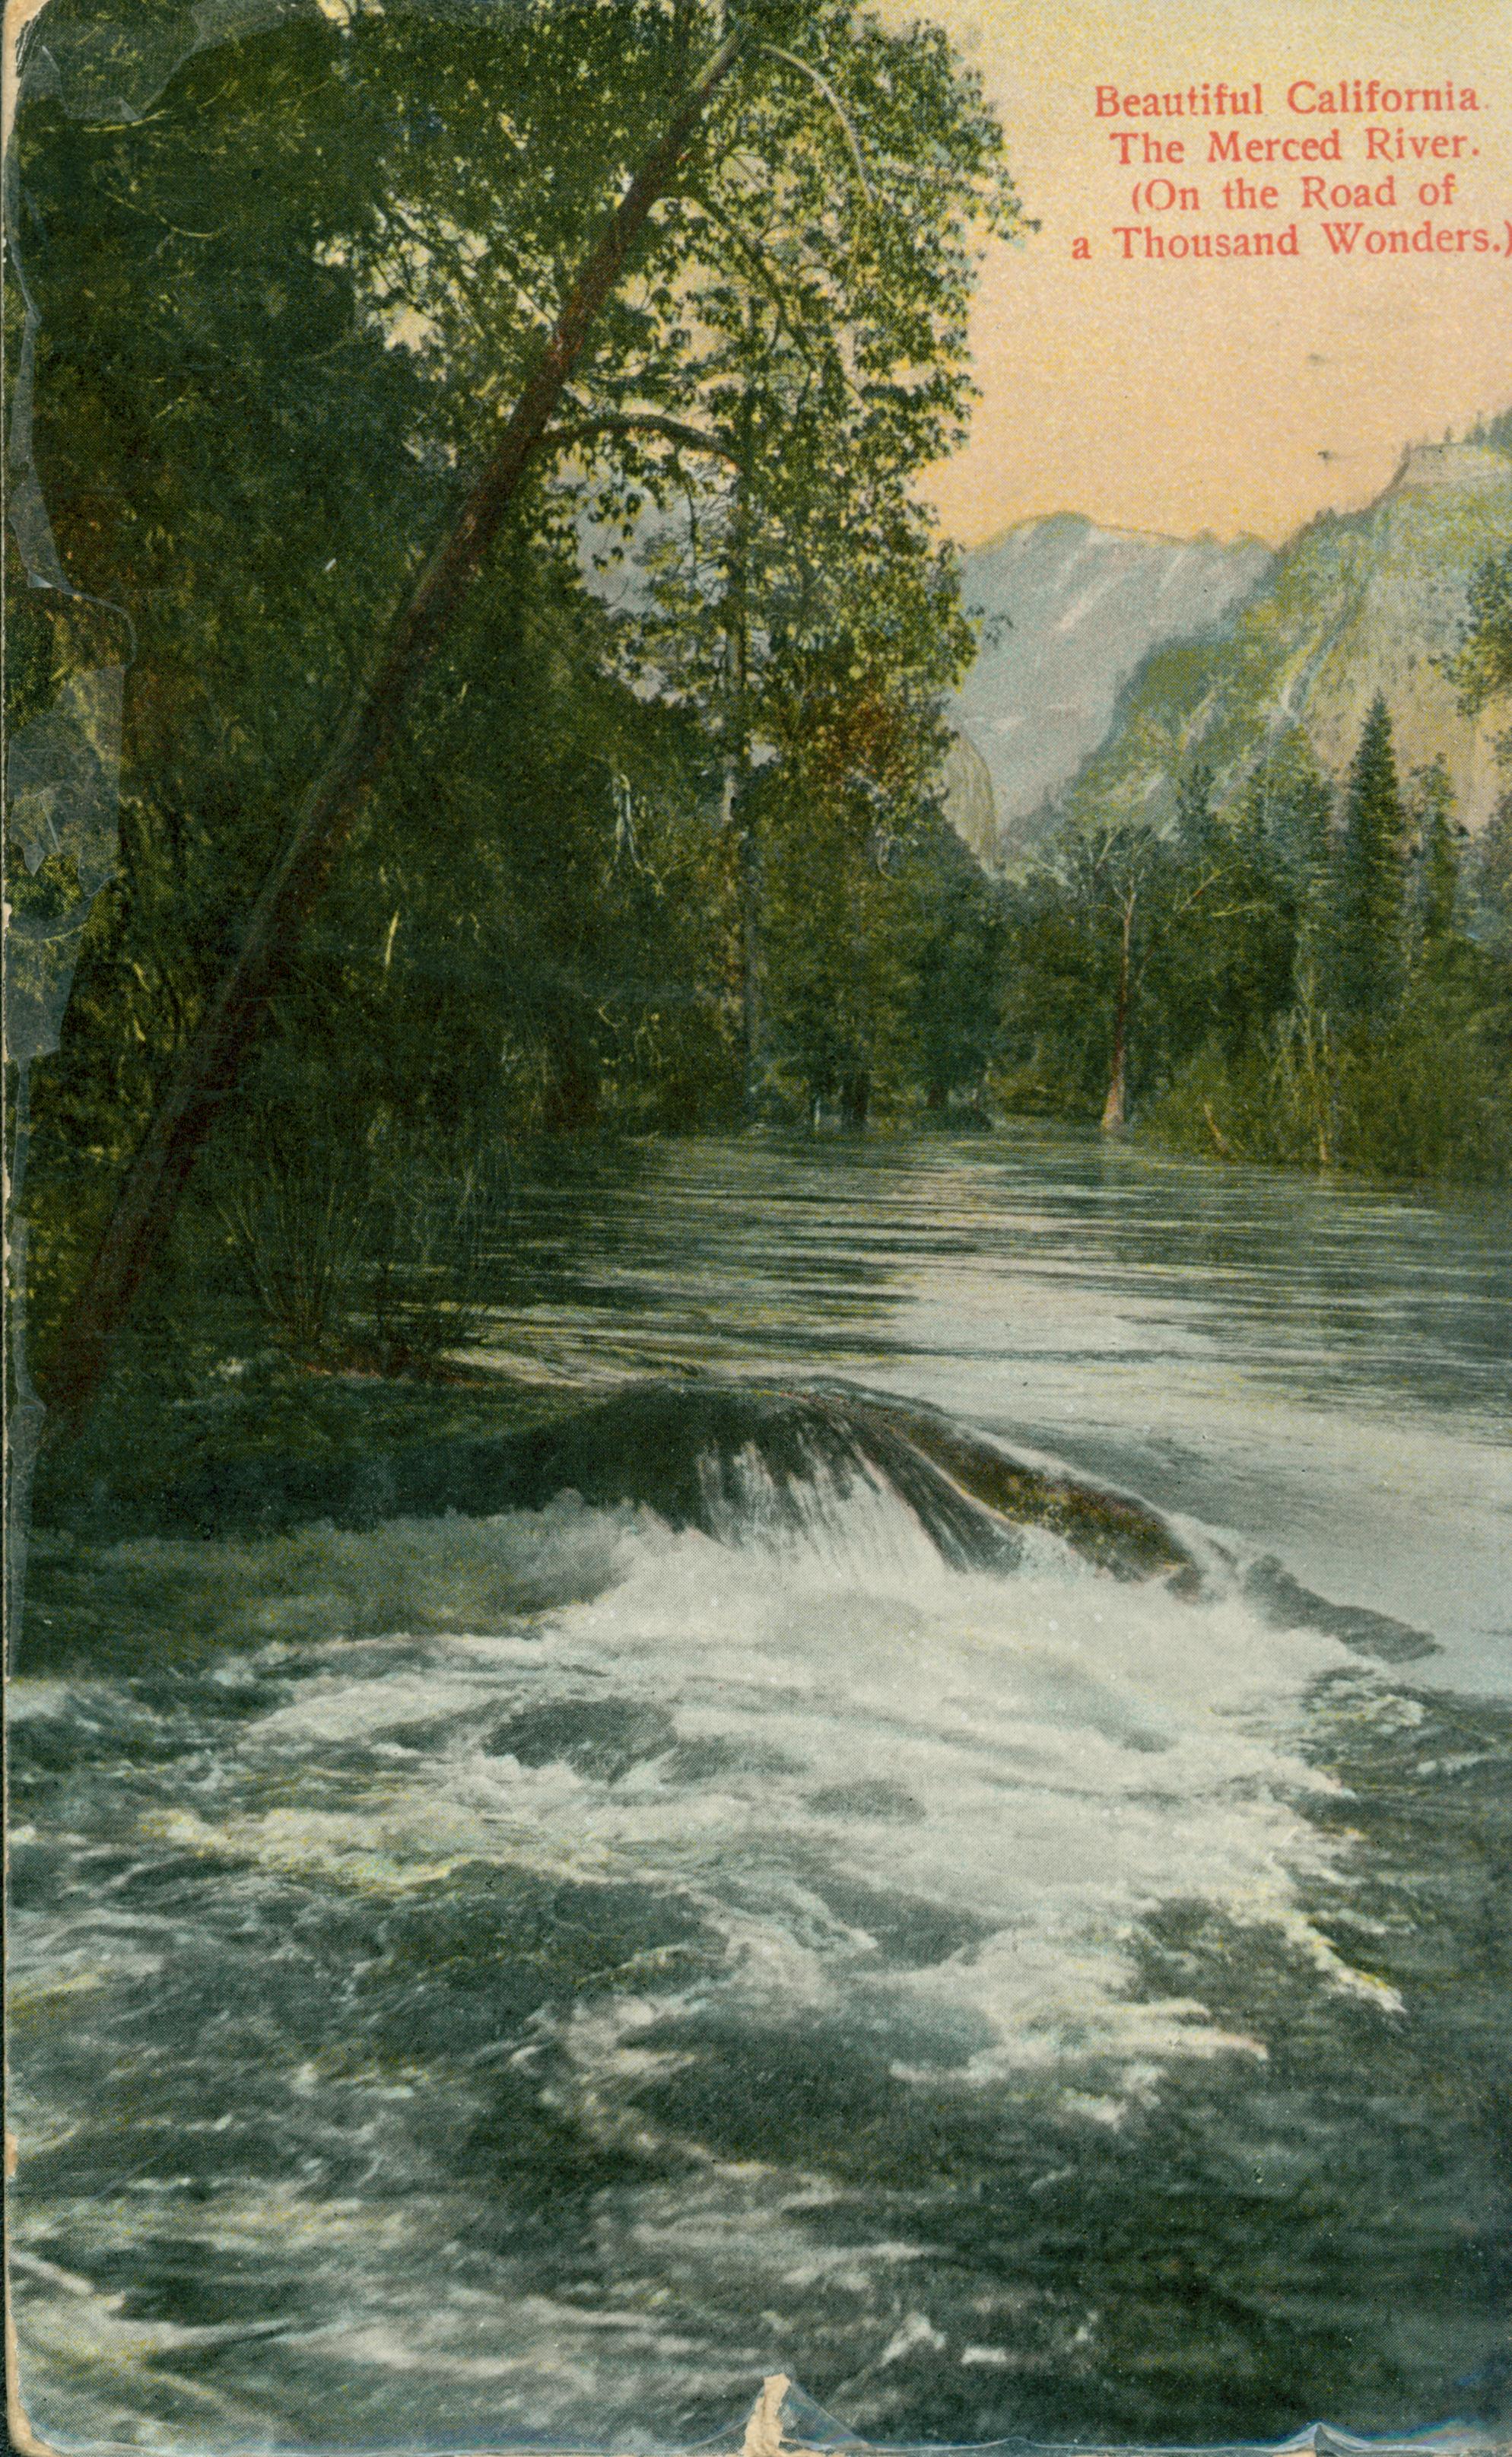 This postcard shows a tree-lined river, with mountain in the background.